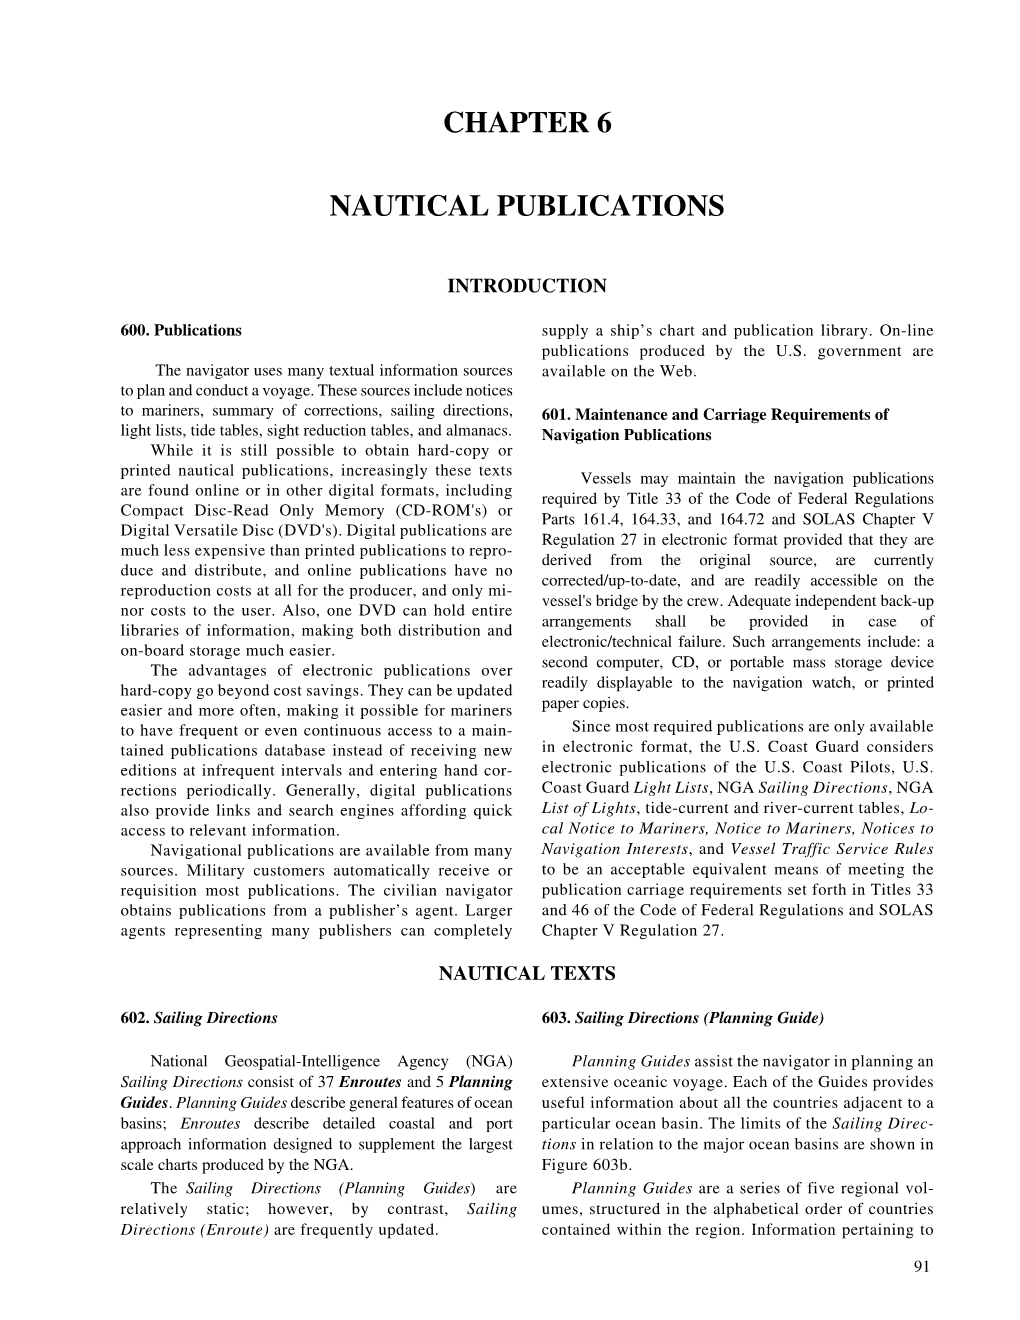 Chapter 6 Nautical Publications